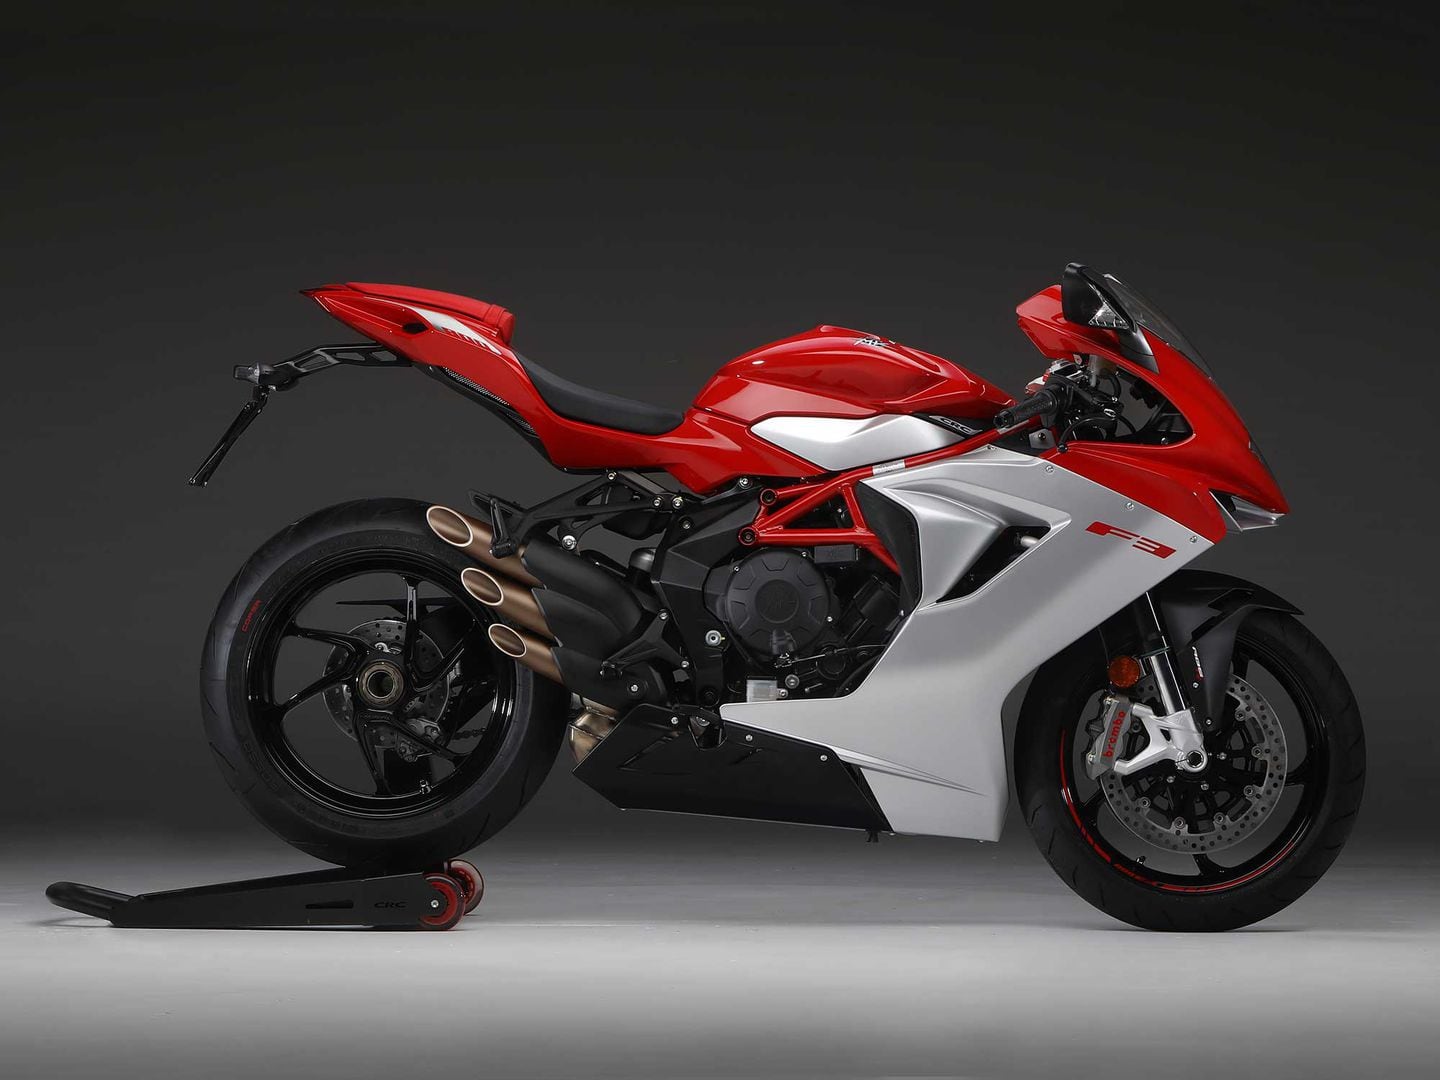 MV Agusta F3 Price, Specs, Mileage, Reviews, Images